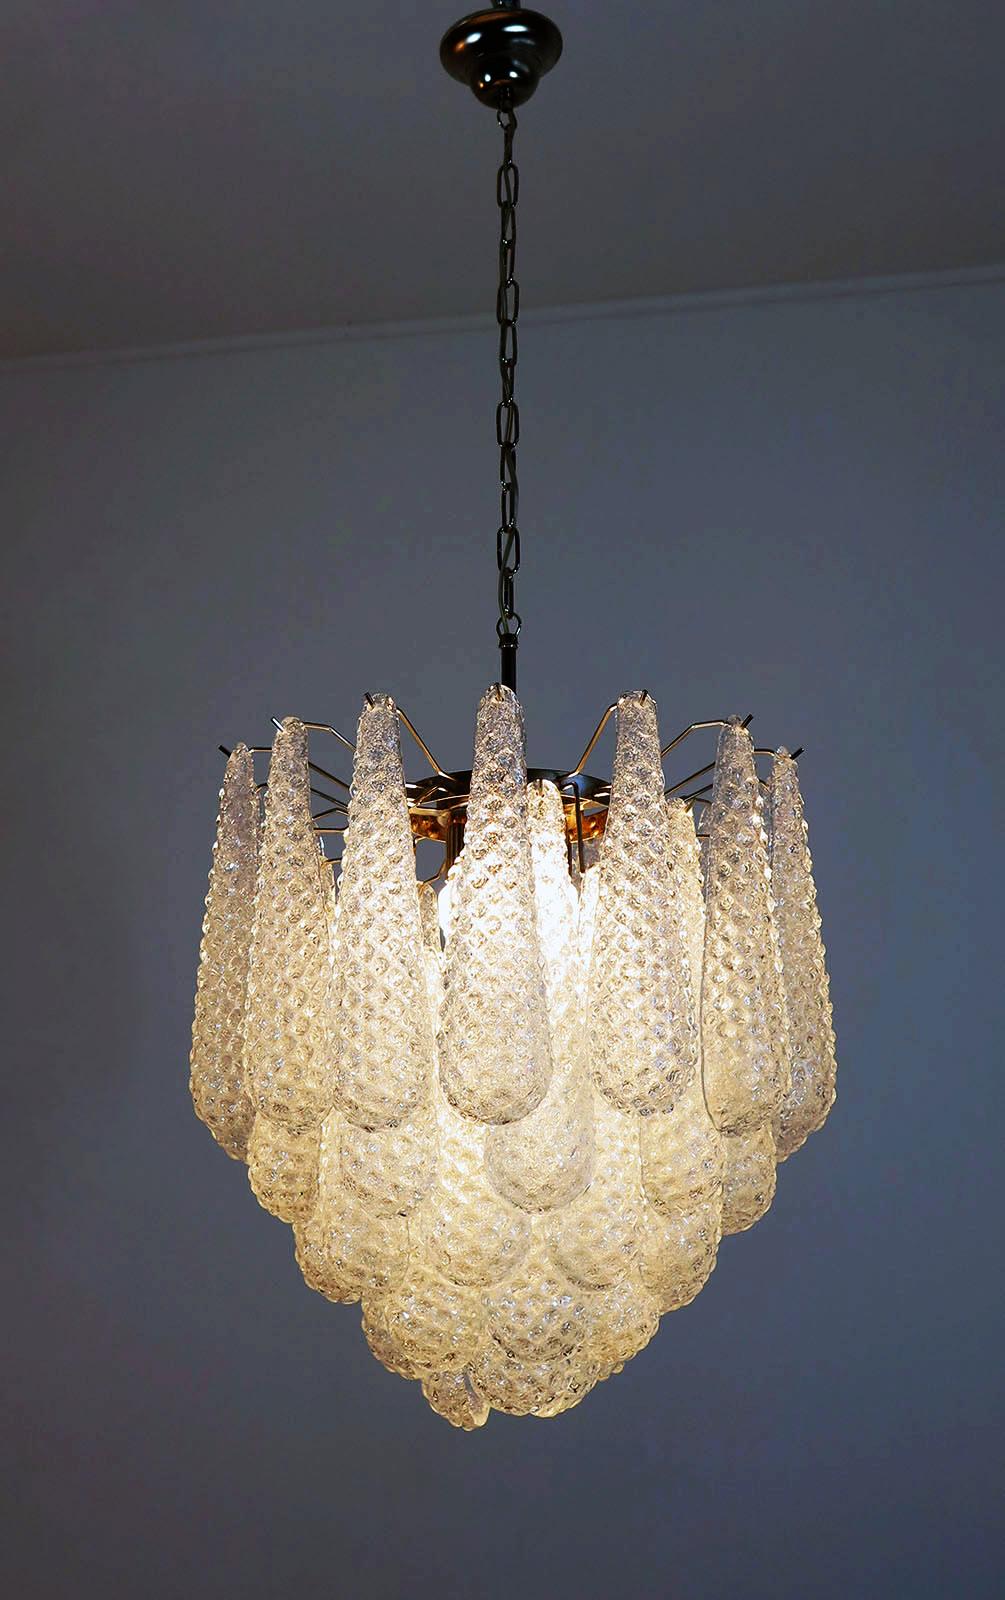 Late 20th Century Charming and Elegant Italian Vintage Murano Chandelier 41 Glass Petals Drop